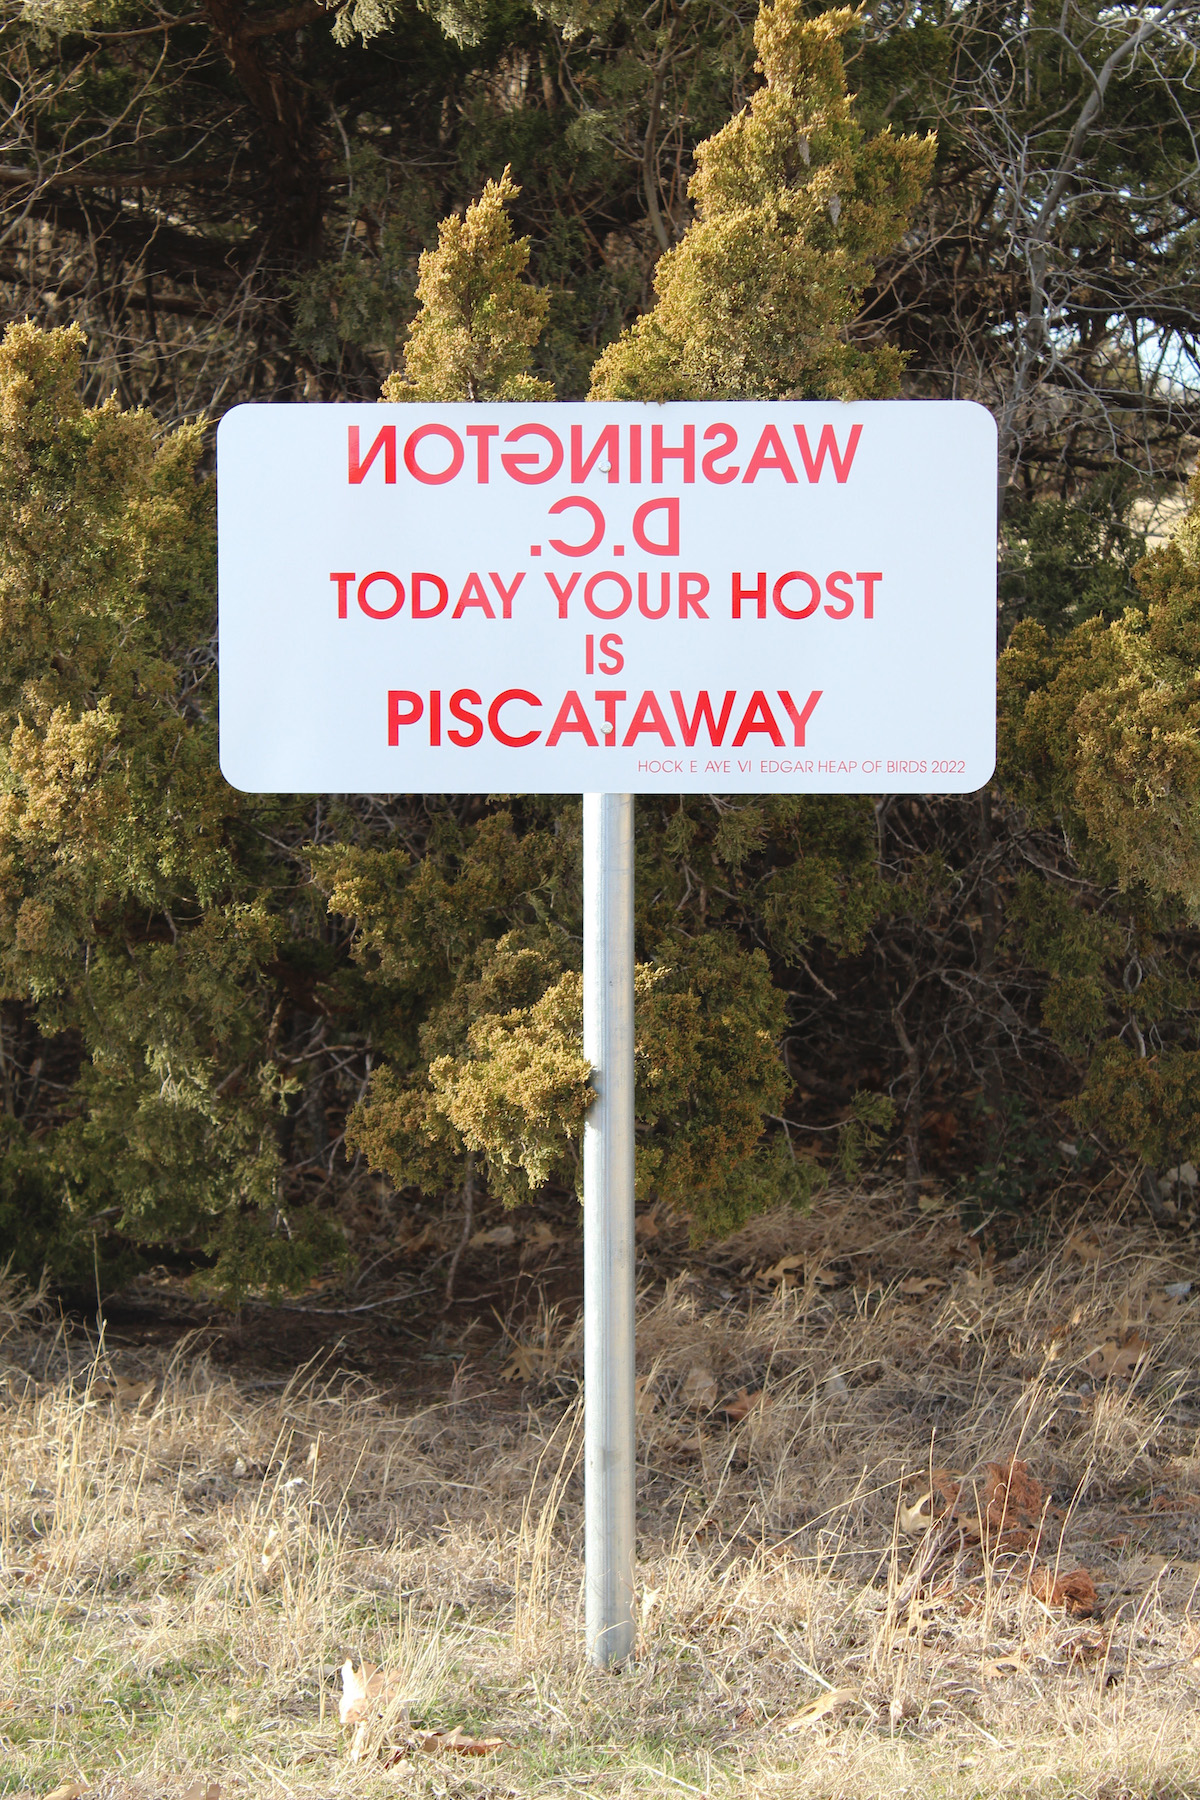 A sign that reads 'WASHINGTON D.C. TODAY YOUR HOST IS PISCATAWAY,' with the first two words flipped backwards. The sign is set in a patch of dying grass before some trees.